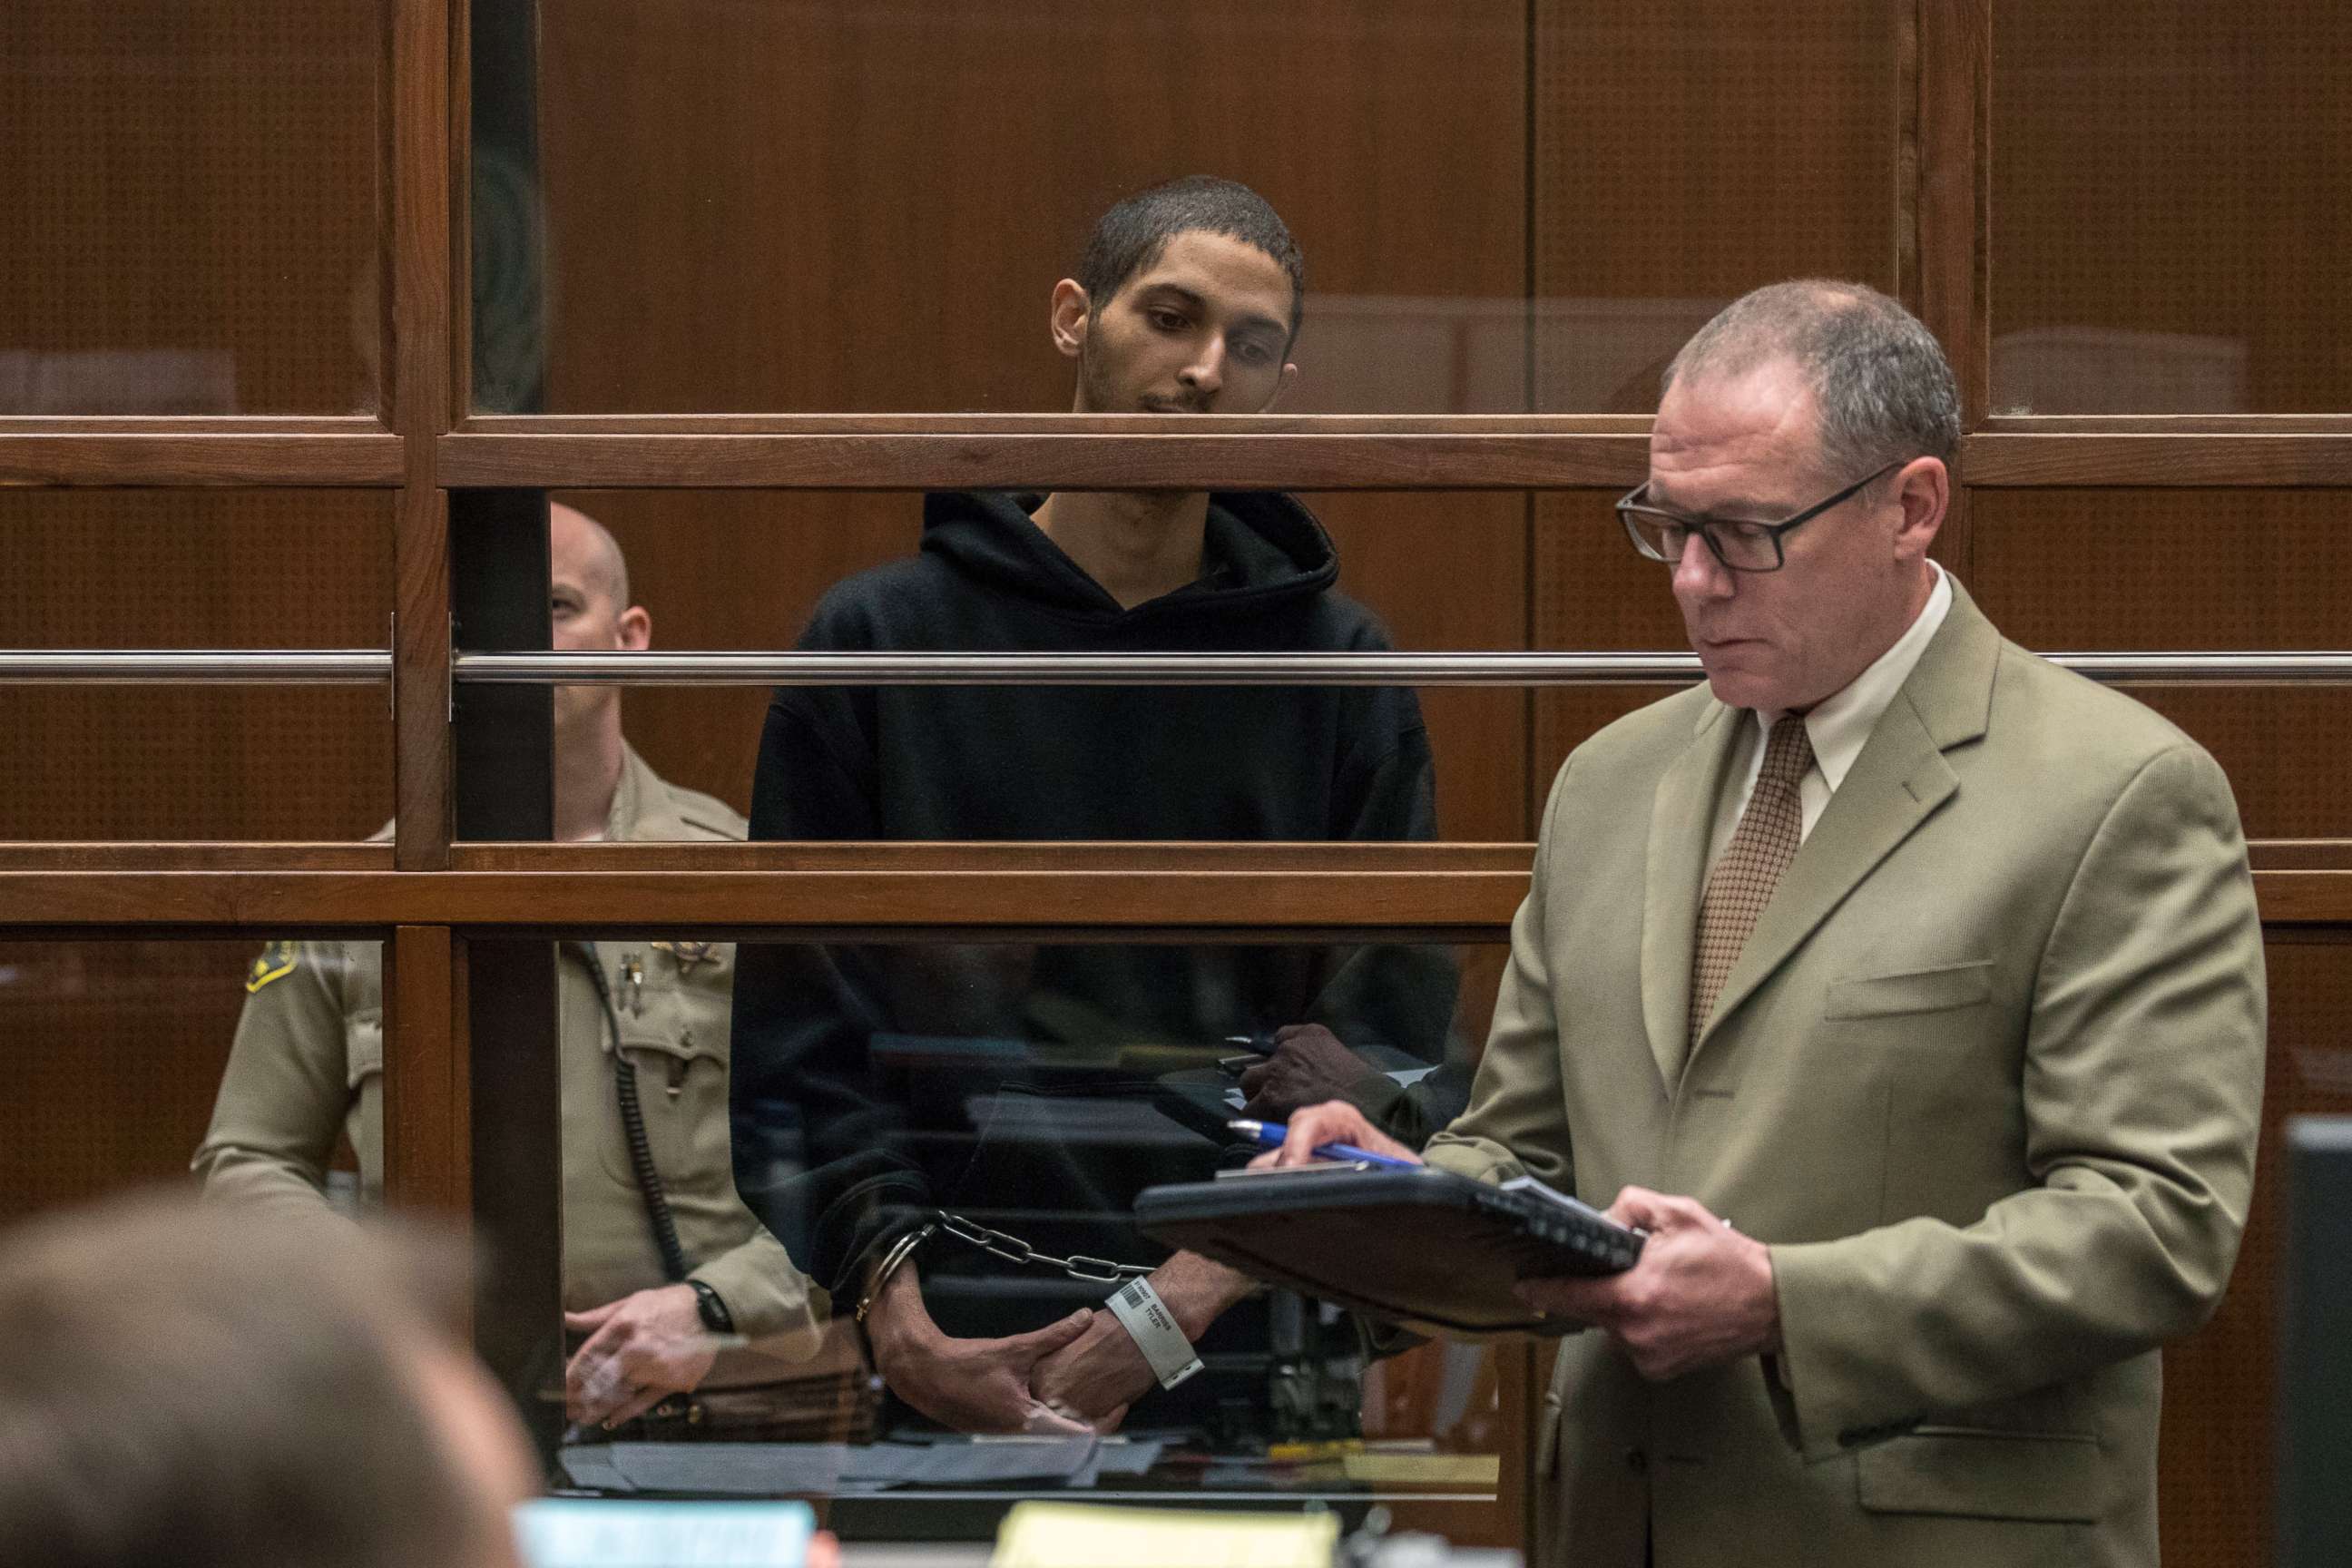 PHOTO: Tyler Barriss stands near public defender Mearl Lottman as he appears for an extradition hearing at Los Angeles Superior Court, Jan. 3, 2018, in Los Angeles.